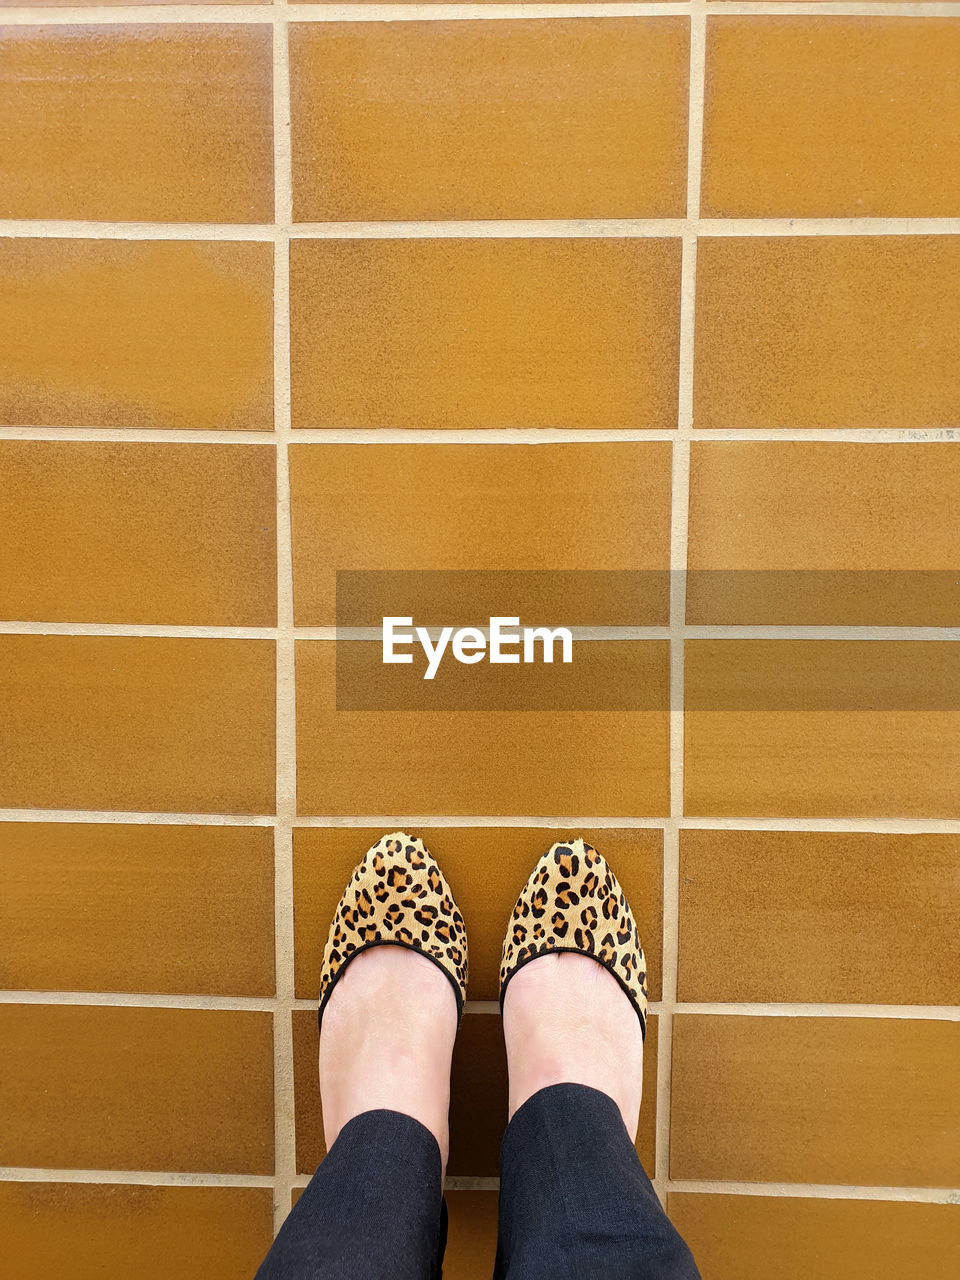 yellow, human leg, shoe, low section, one person, footwear, personal perspective, lifestyles, standing, pattern, limb, adult, human limb, women, flooring, clothing, indoors, directly above, human foot, sandal, leisure activity, brown, copy space, fashion, tile, casual clothing, wall